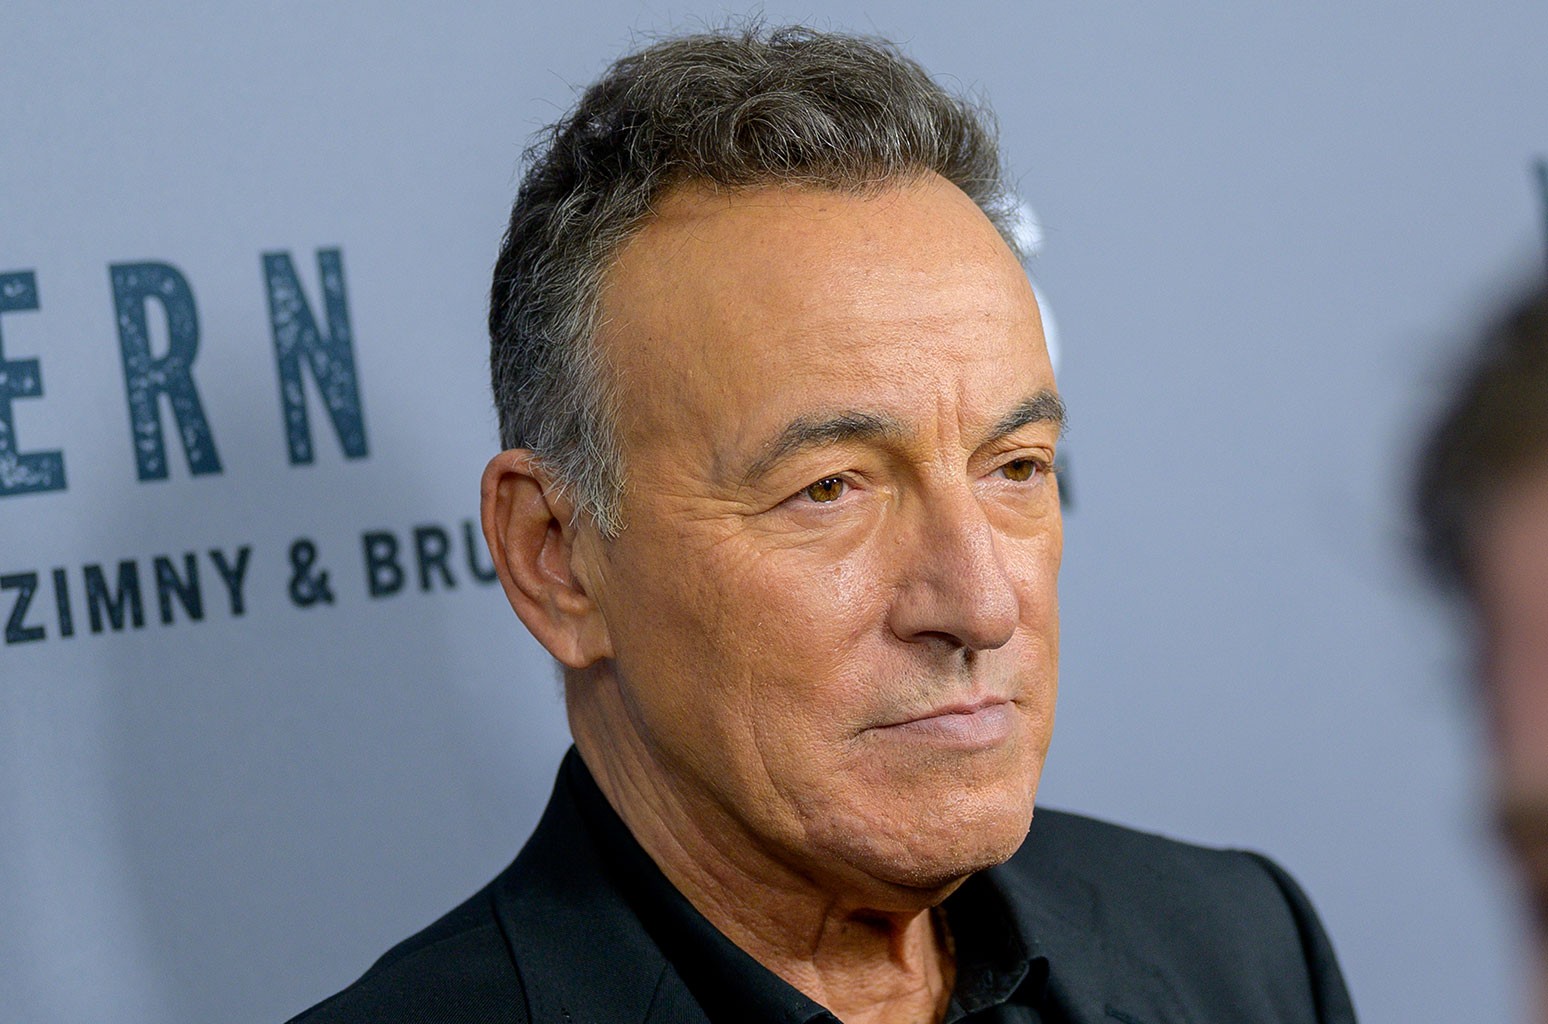 Friends Fear Bruce Springsteen’s Health As They Claim “Death Warmed Over Him”